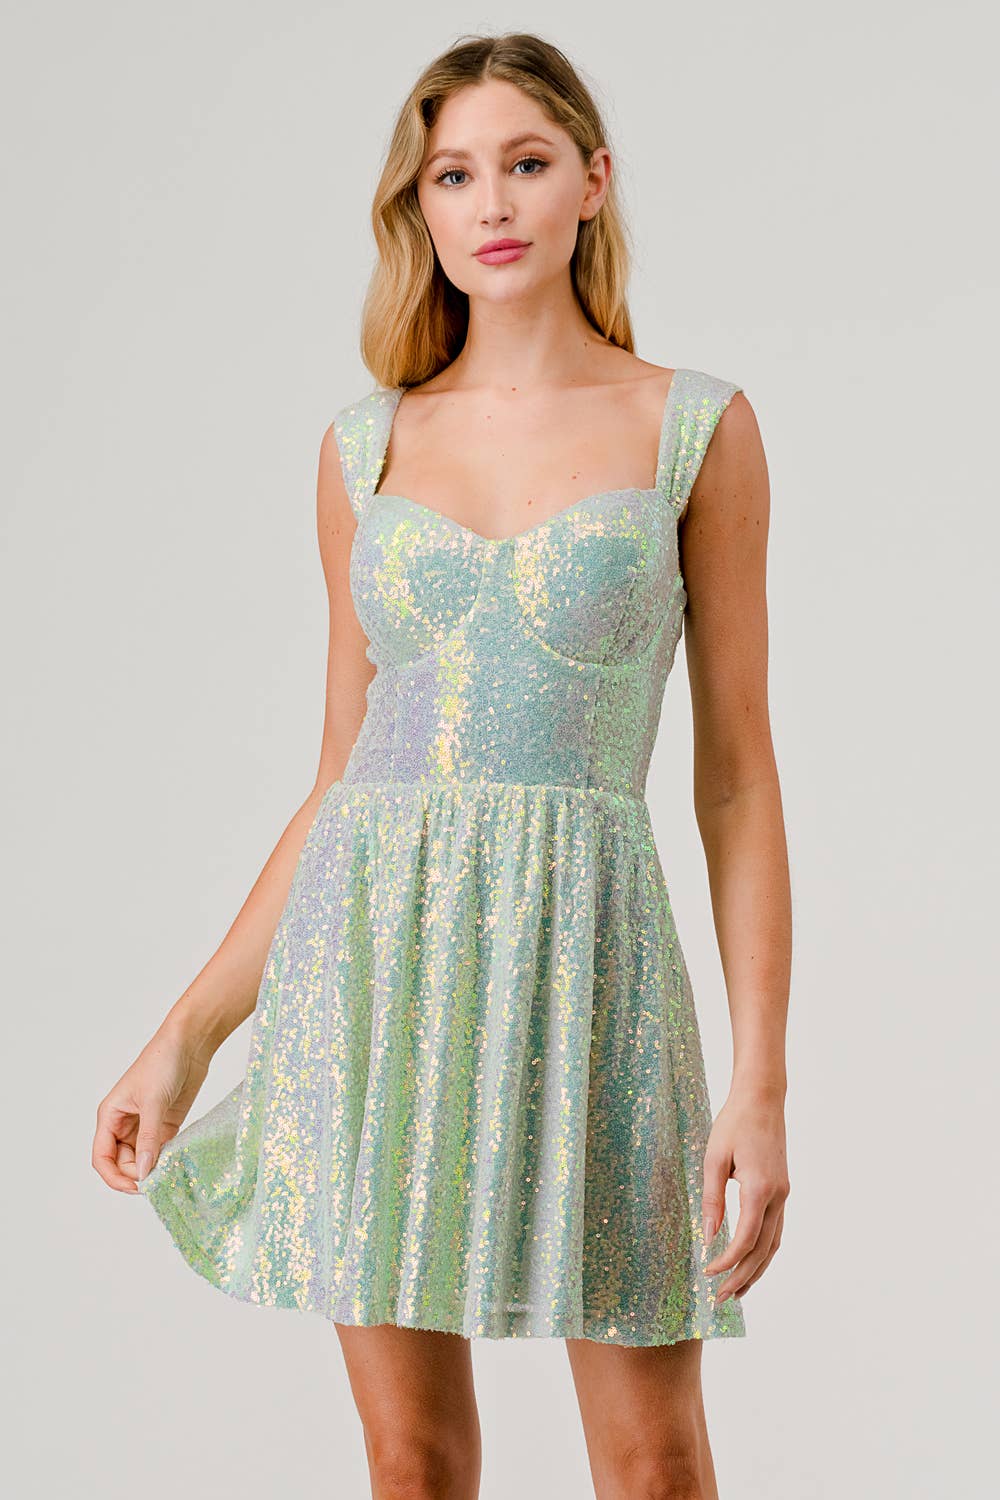 Storia Daisy and Glitter Sequin Embellished Midi Dress – Girl Intuitive